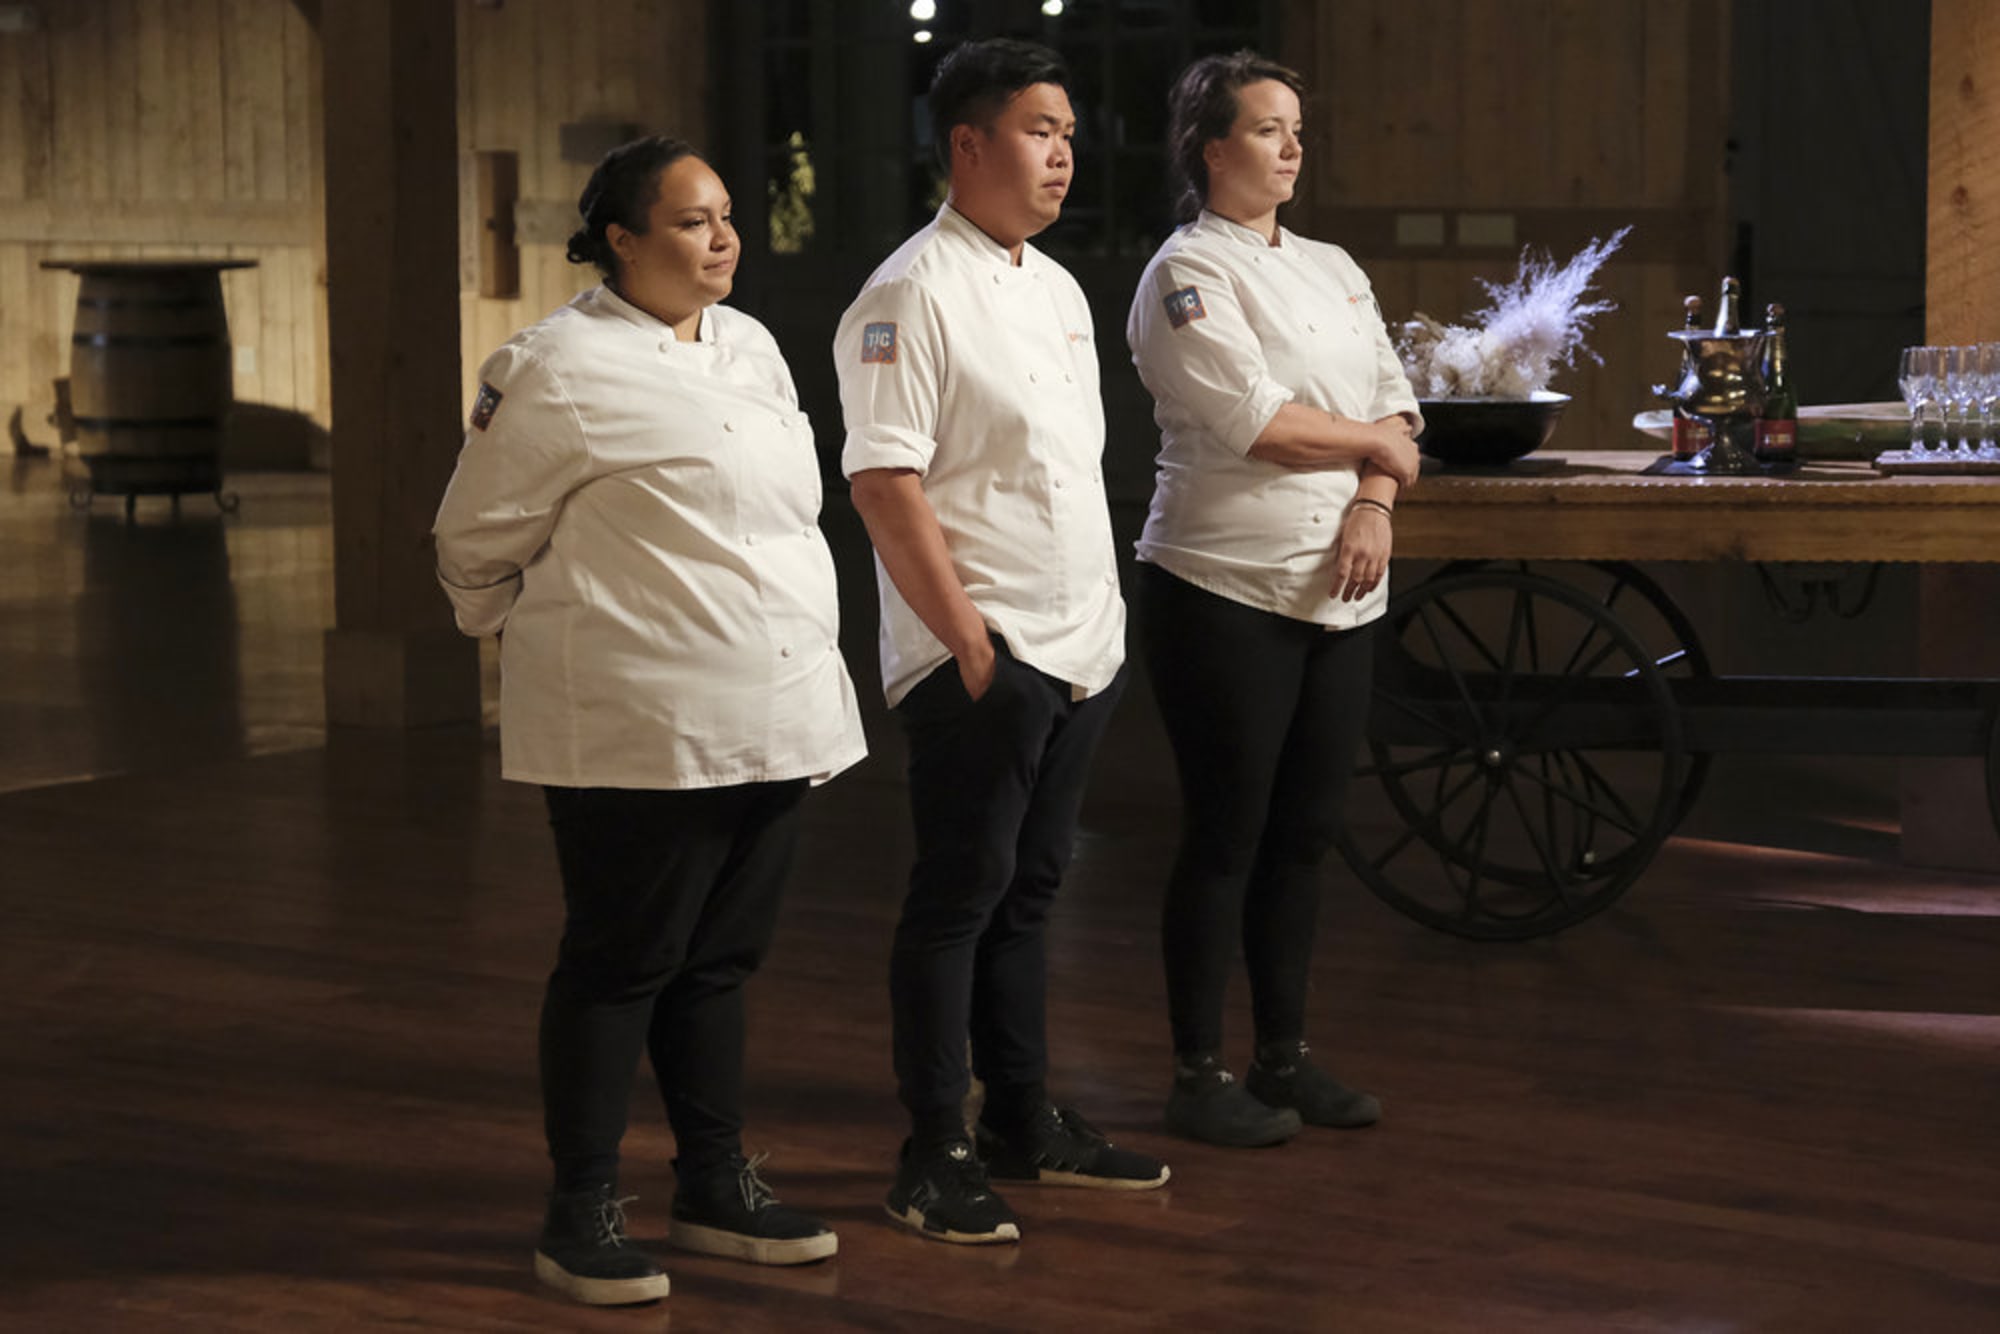 Top Chef Season 19 finalists said this challenge revealed top